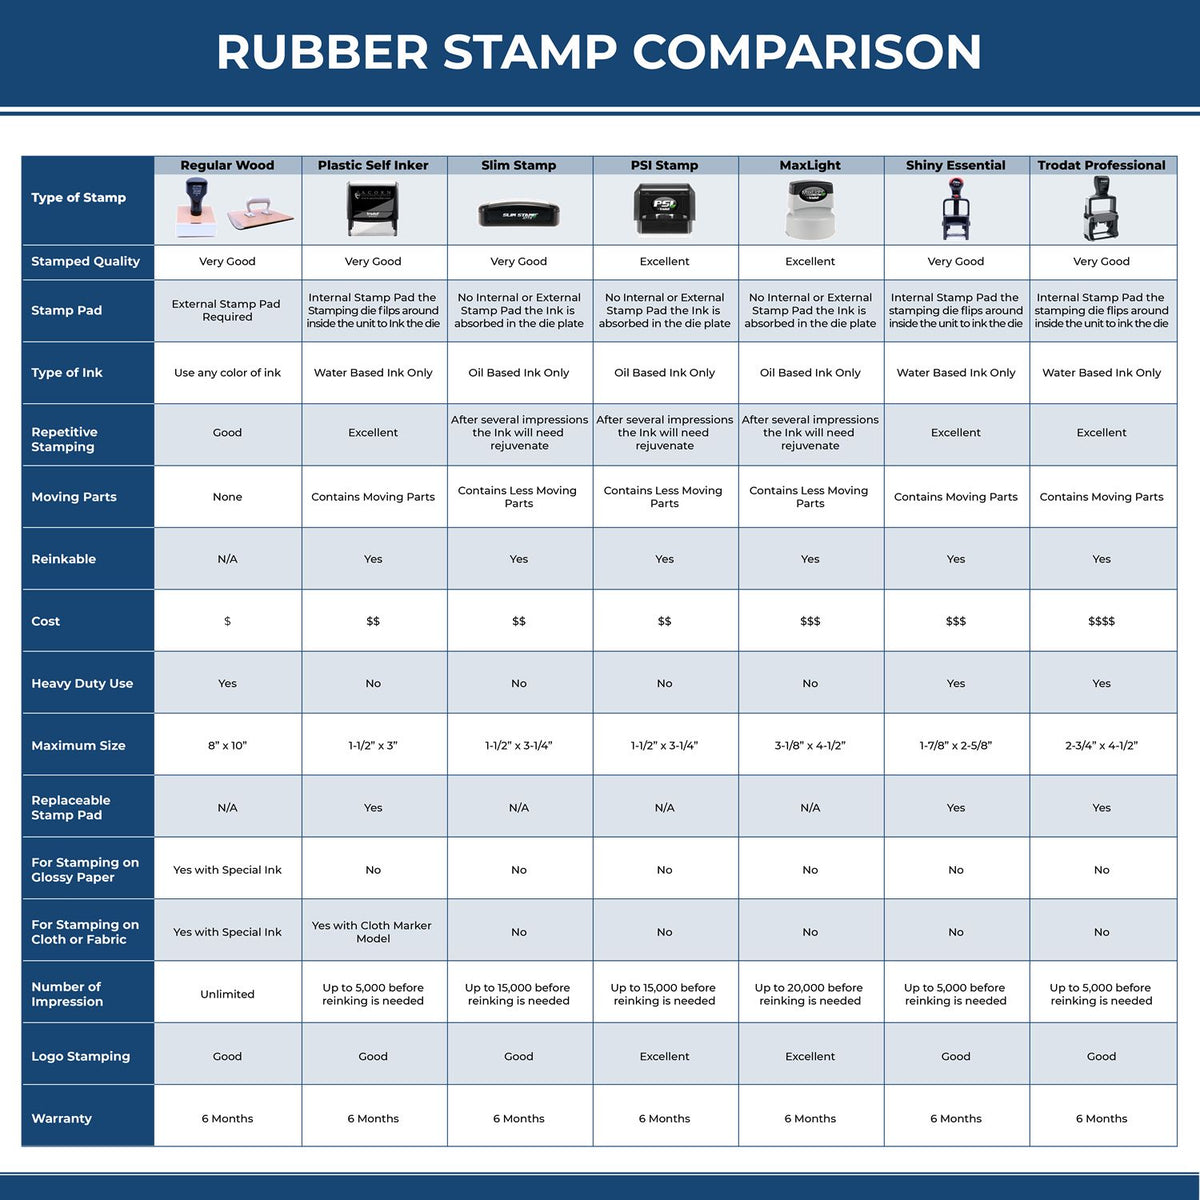 Large Self-Inking Dated Material Open Immediately Stamp 5632S Rubber Stamp Comparison